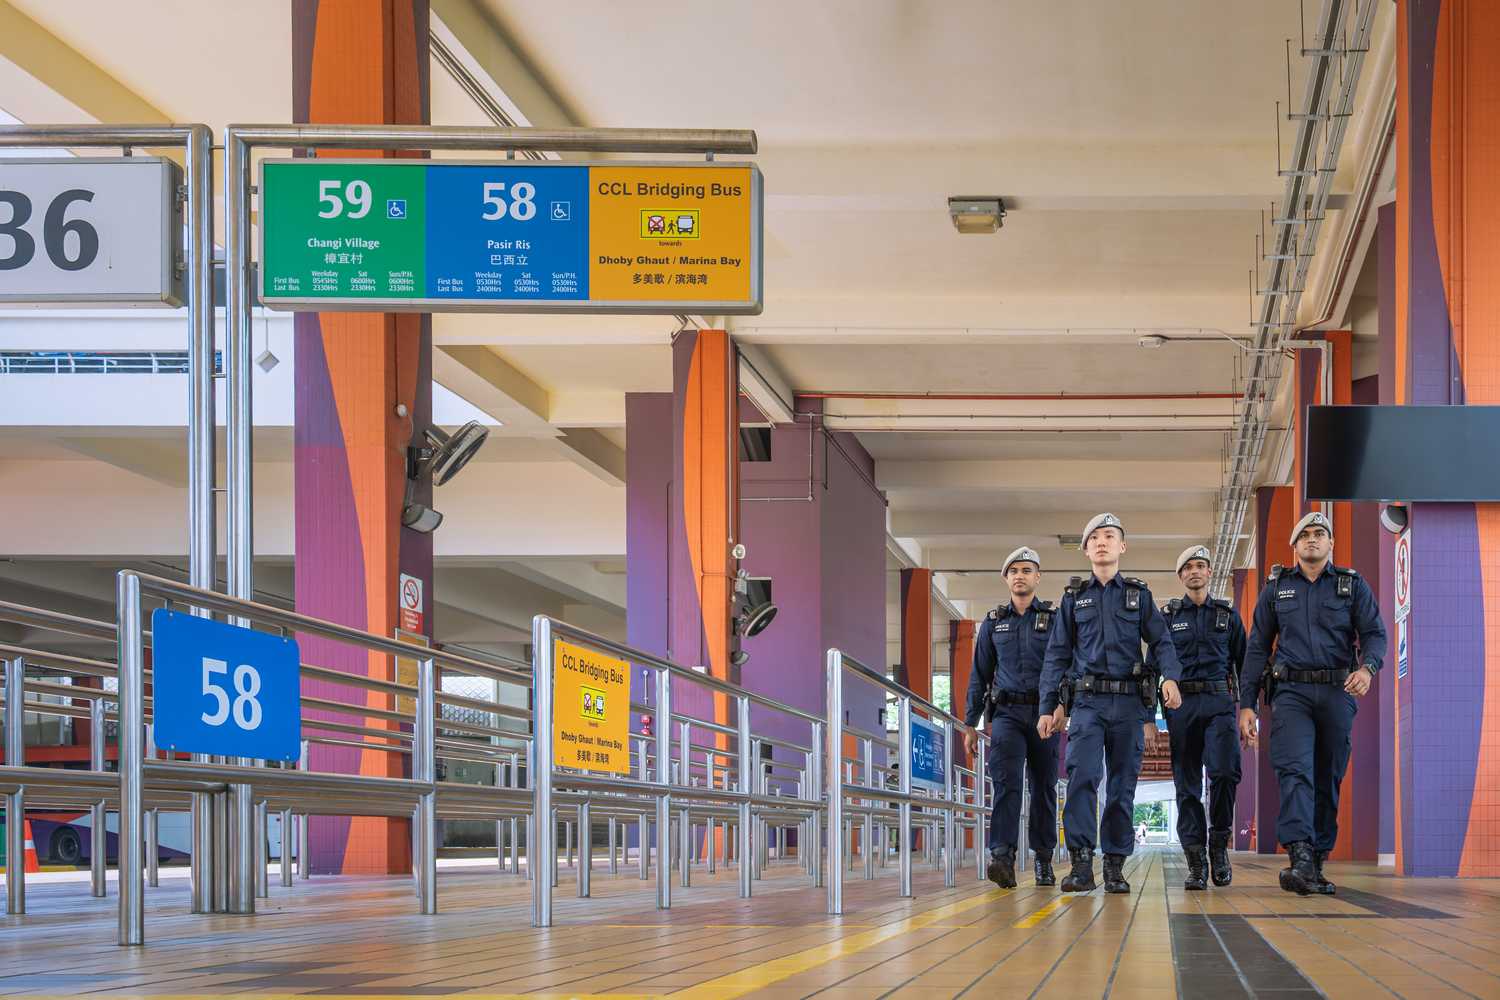 officers walking at the bus interchange but the bus signages for the waiting area can be seen, visibly in orange blue and green signboards, against an orange painted interchange with brick colour tones. 